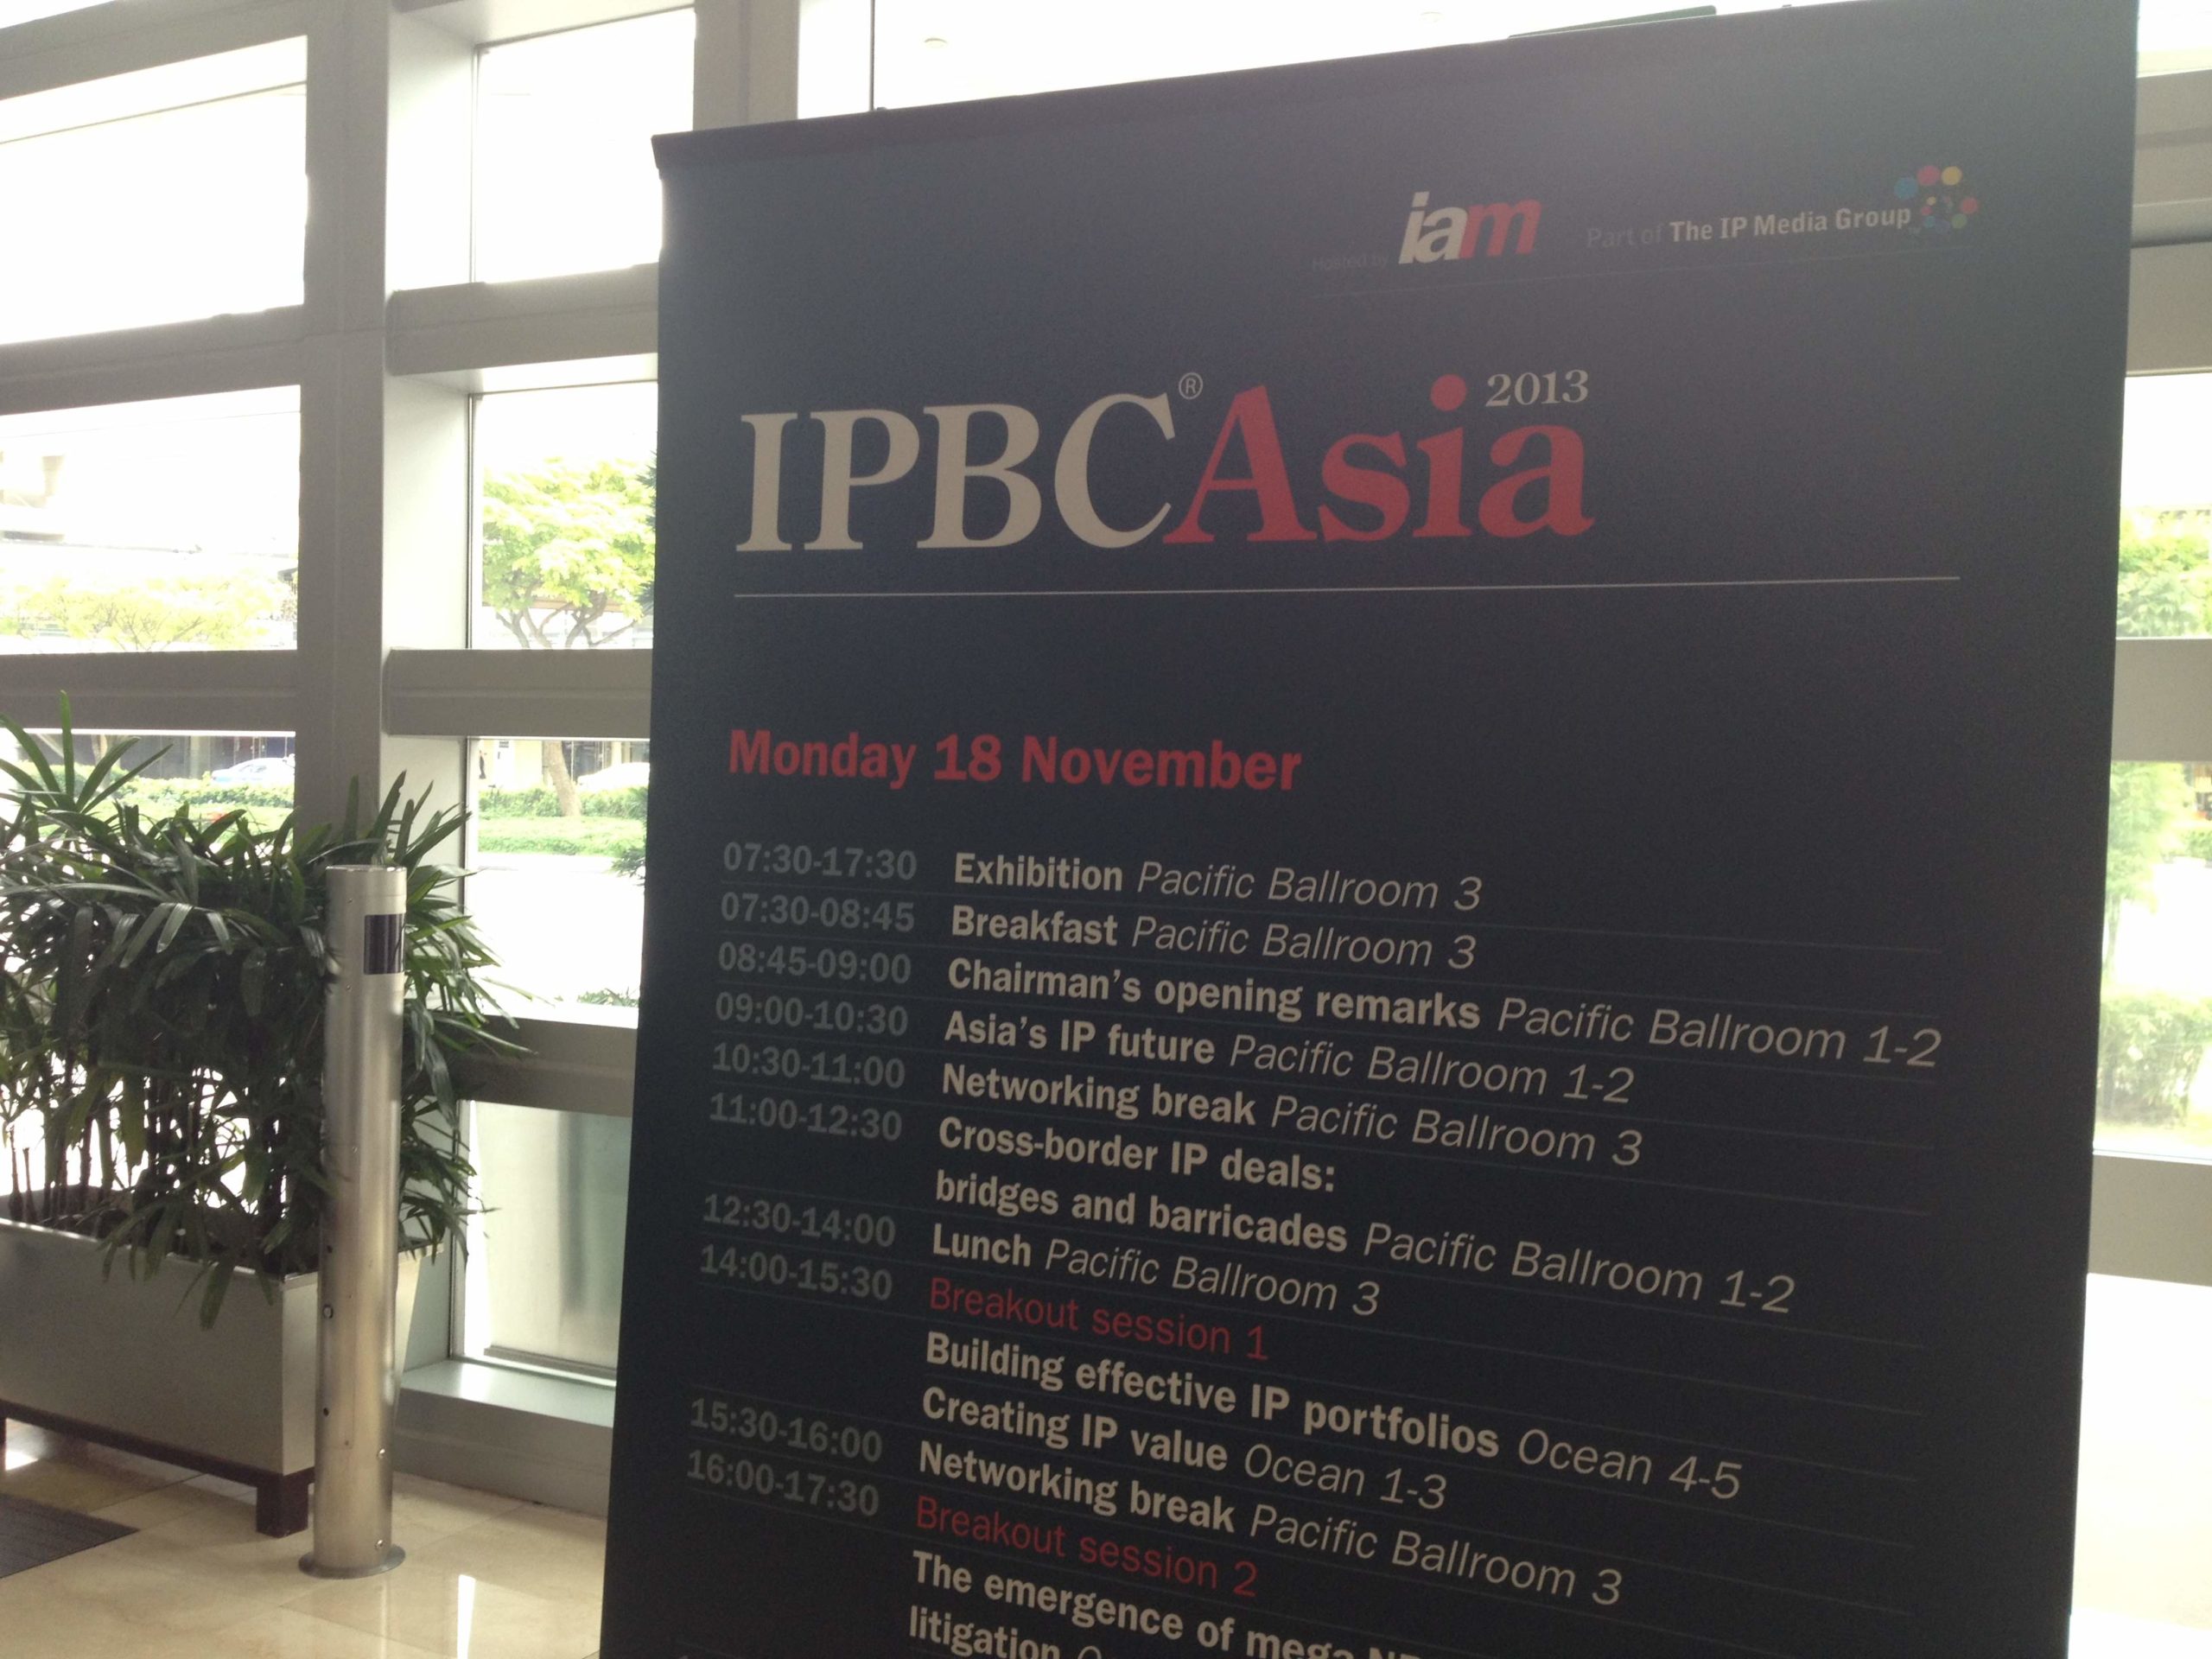 IP Business Congress Asia 2013 in Singapore